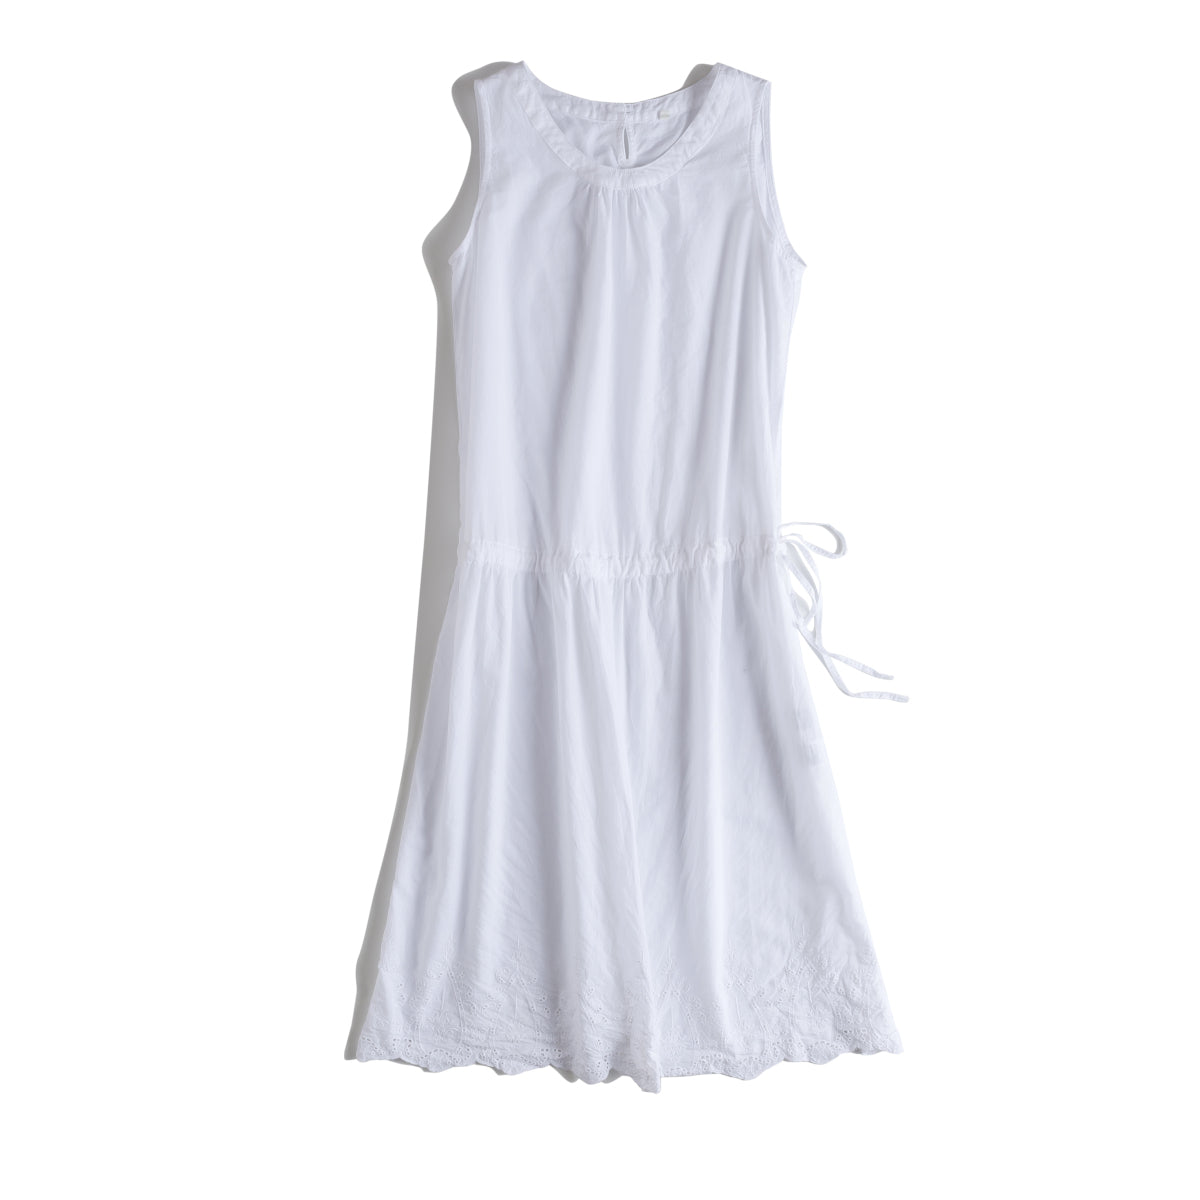 Women Casual Drawing Cotton Sundresses 